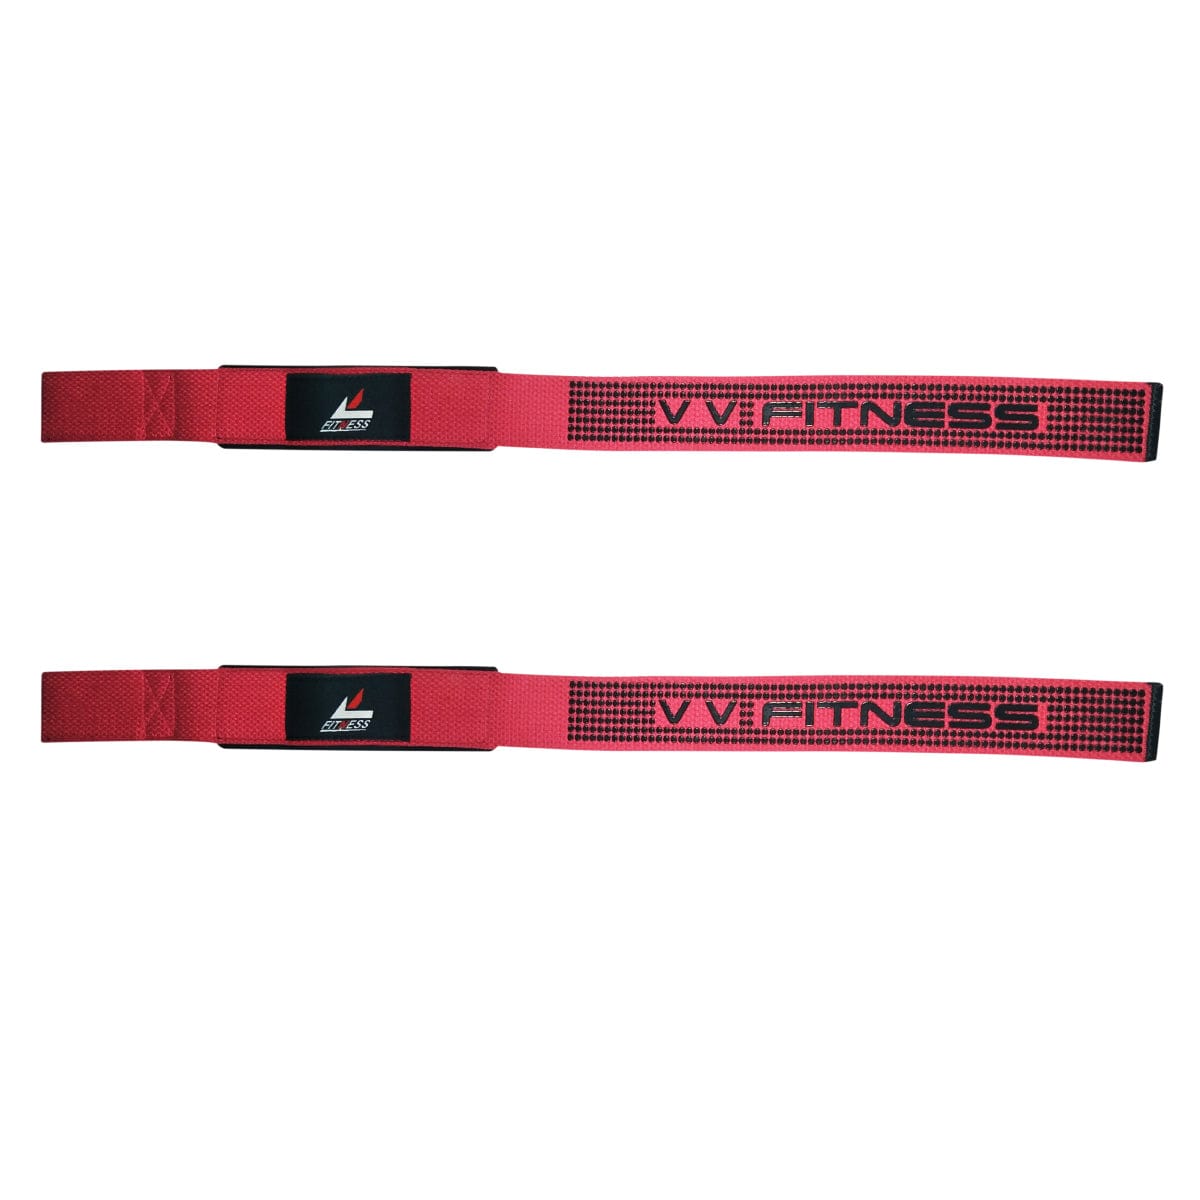 Gym Weight Lifting Straps Wrist Support Hooks Wrist Straps for Men and Women Weightlifting, Powerlifting, Deadlifts